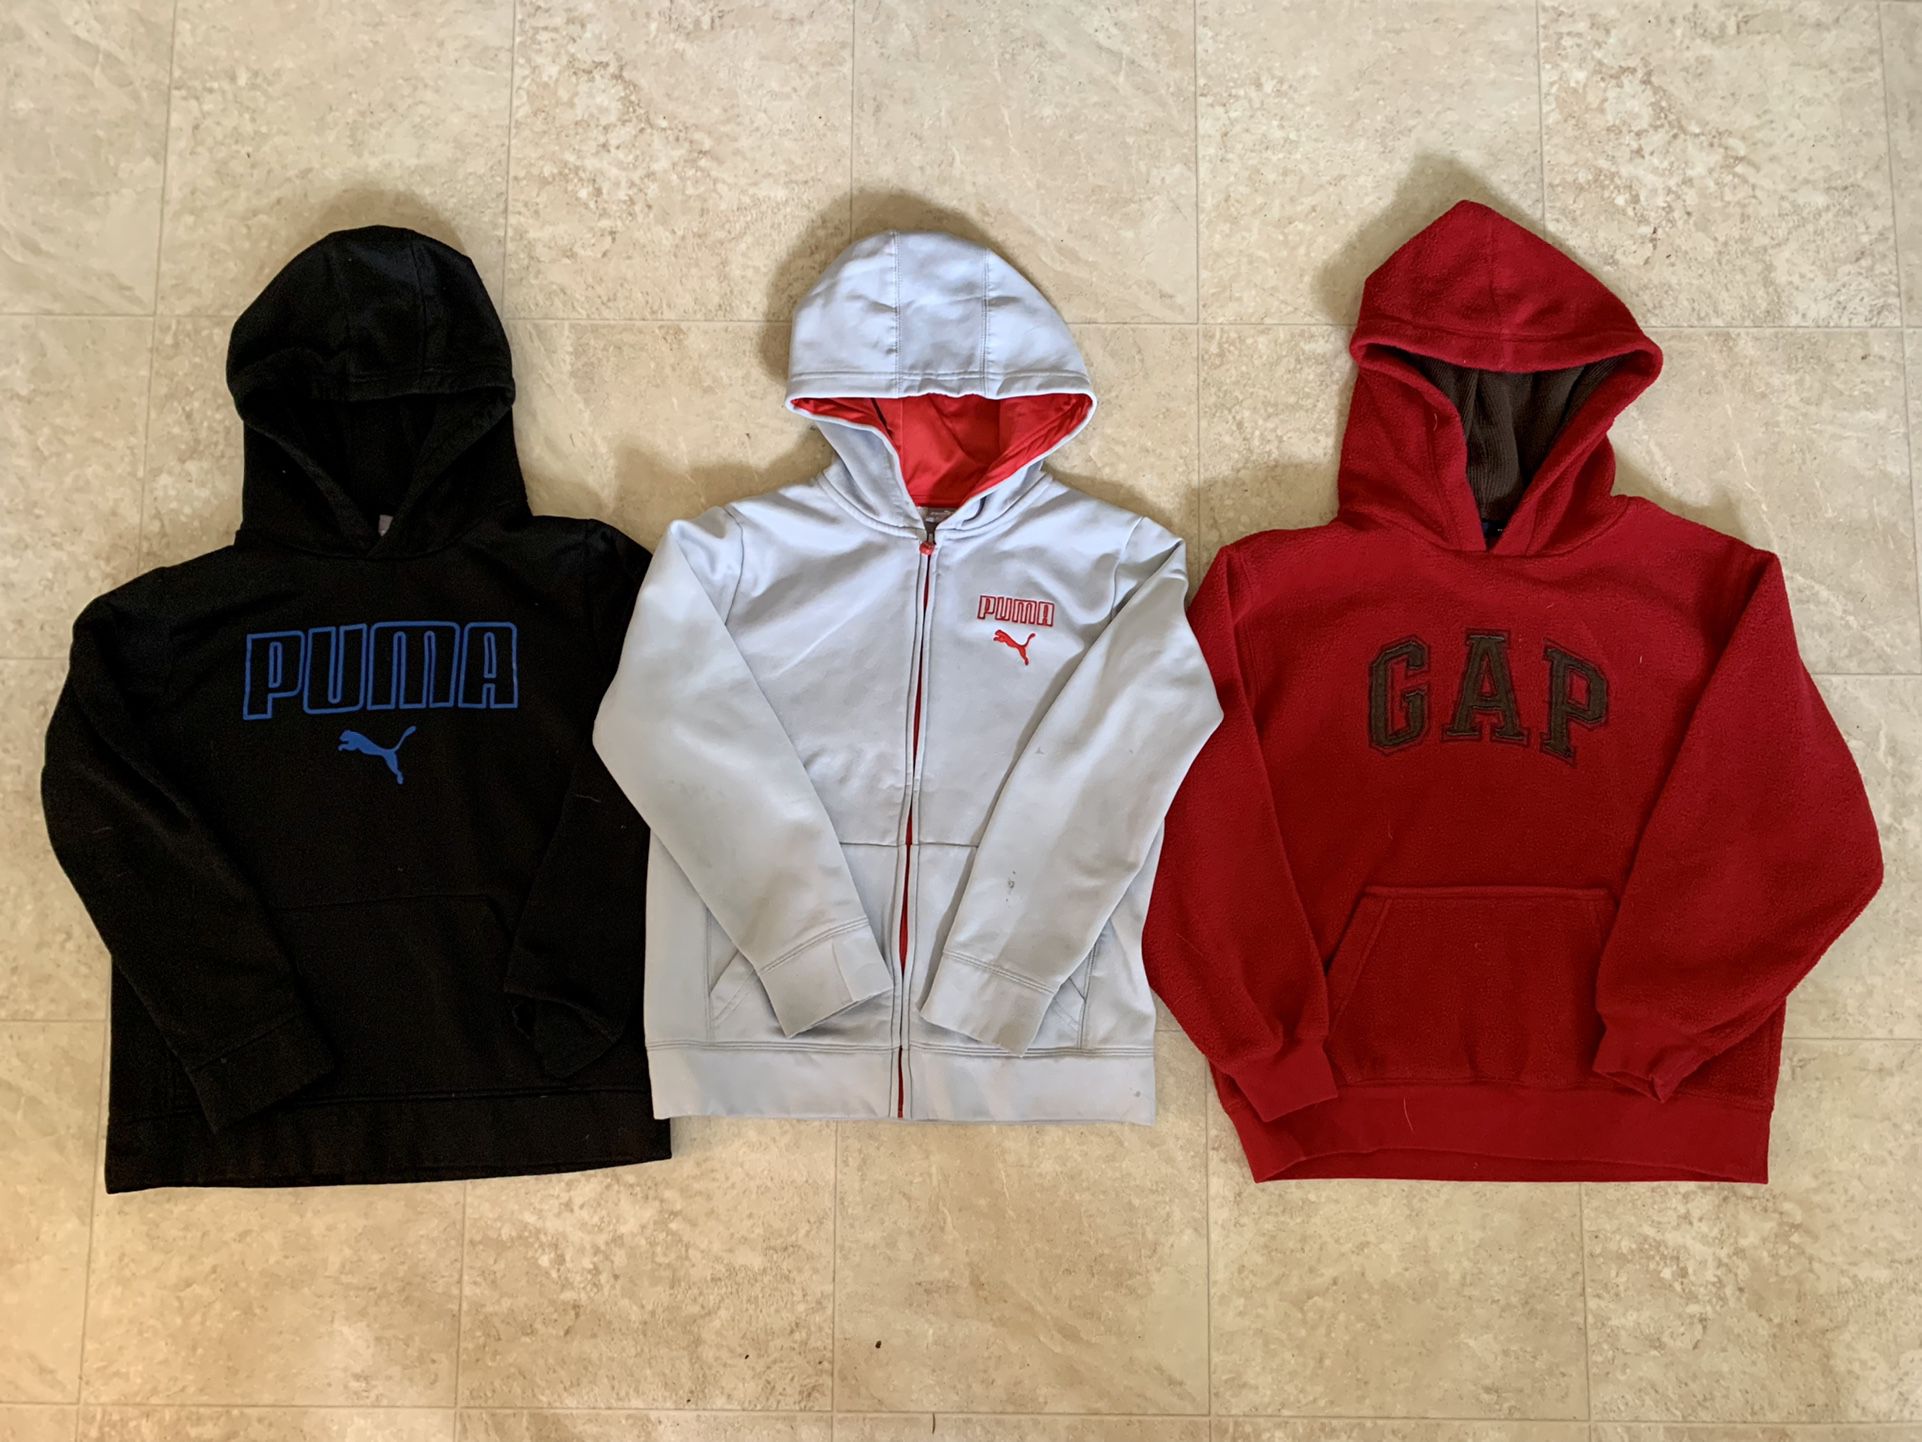 3 Youth Size Hoodies